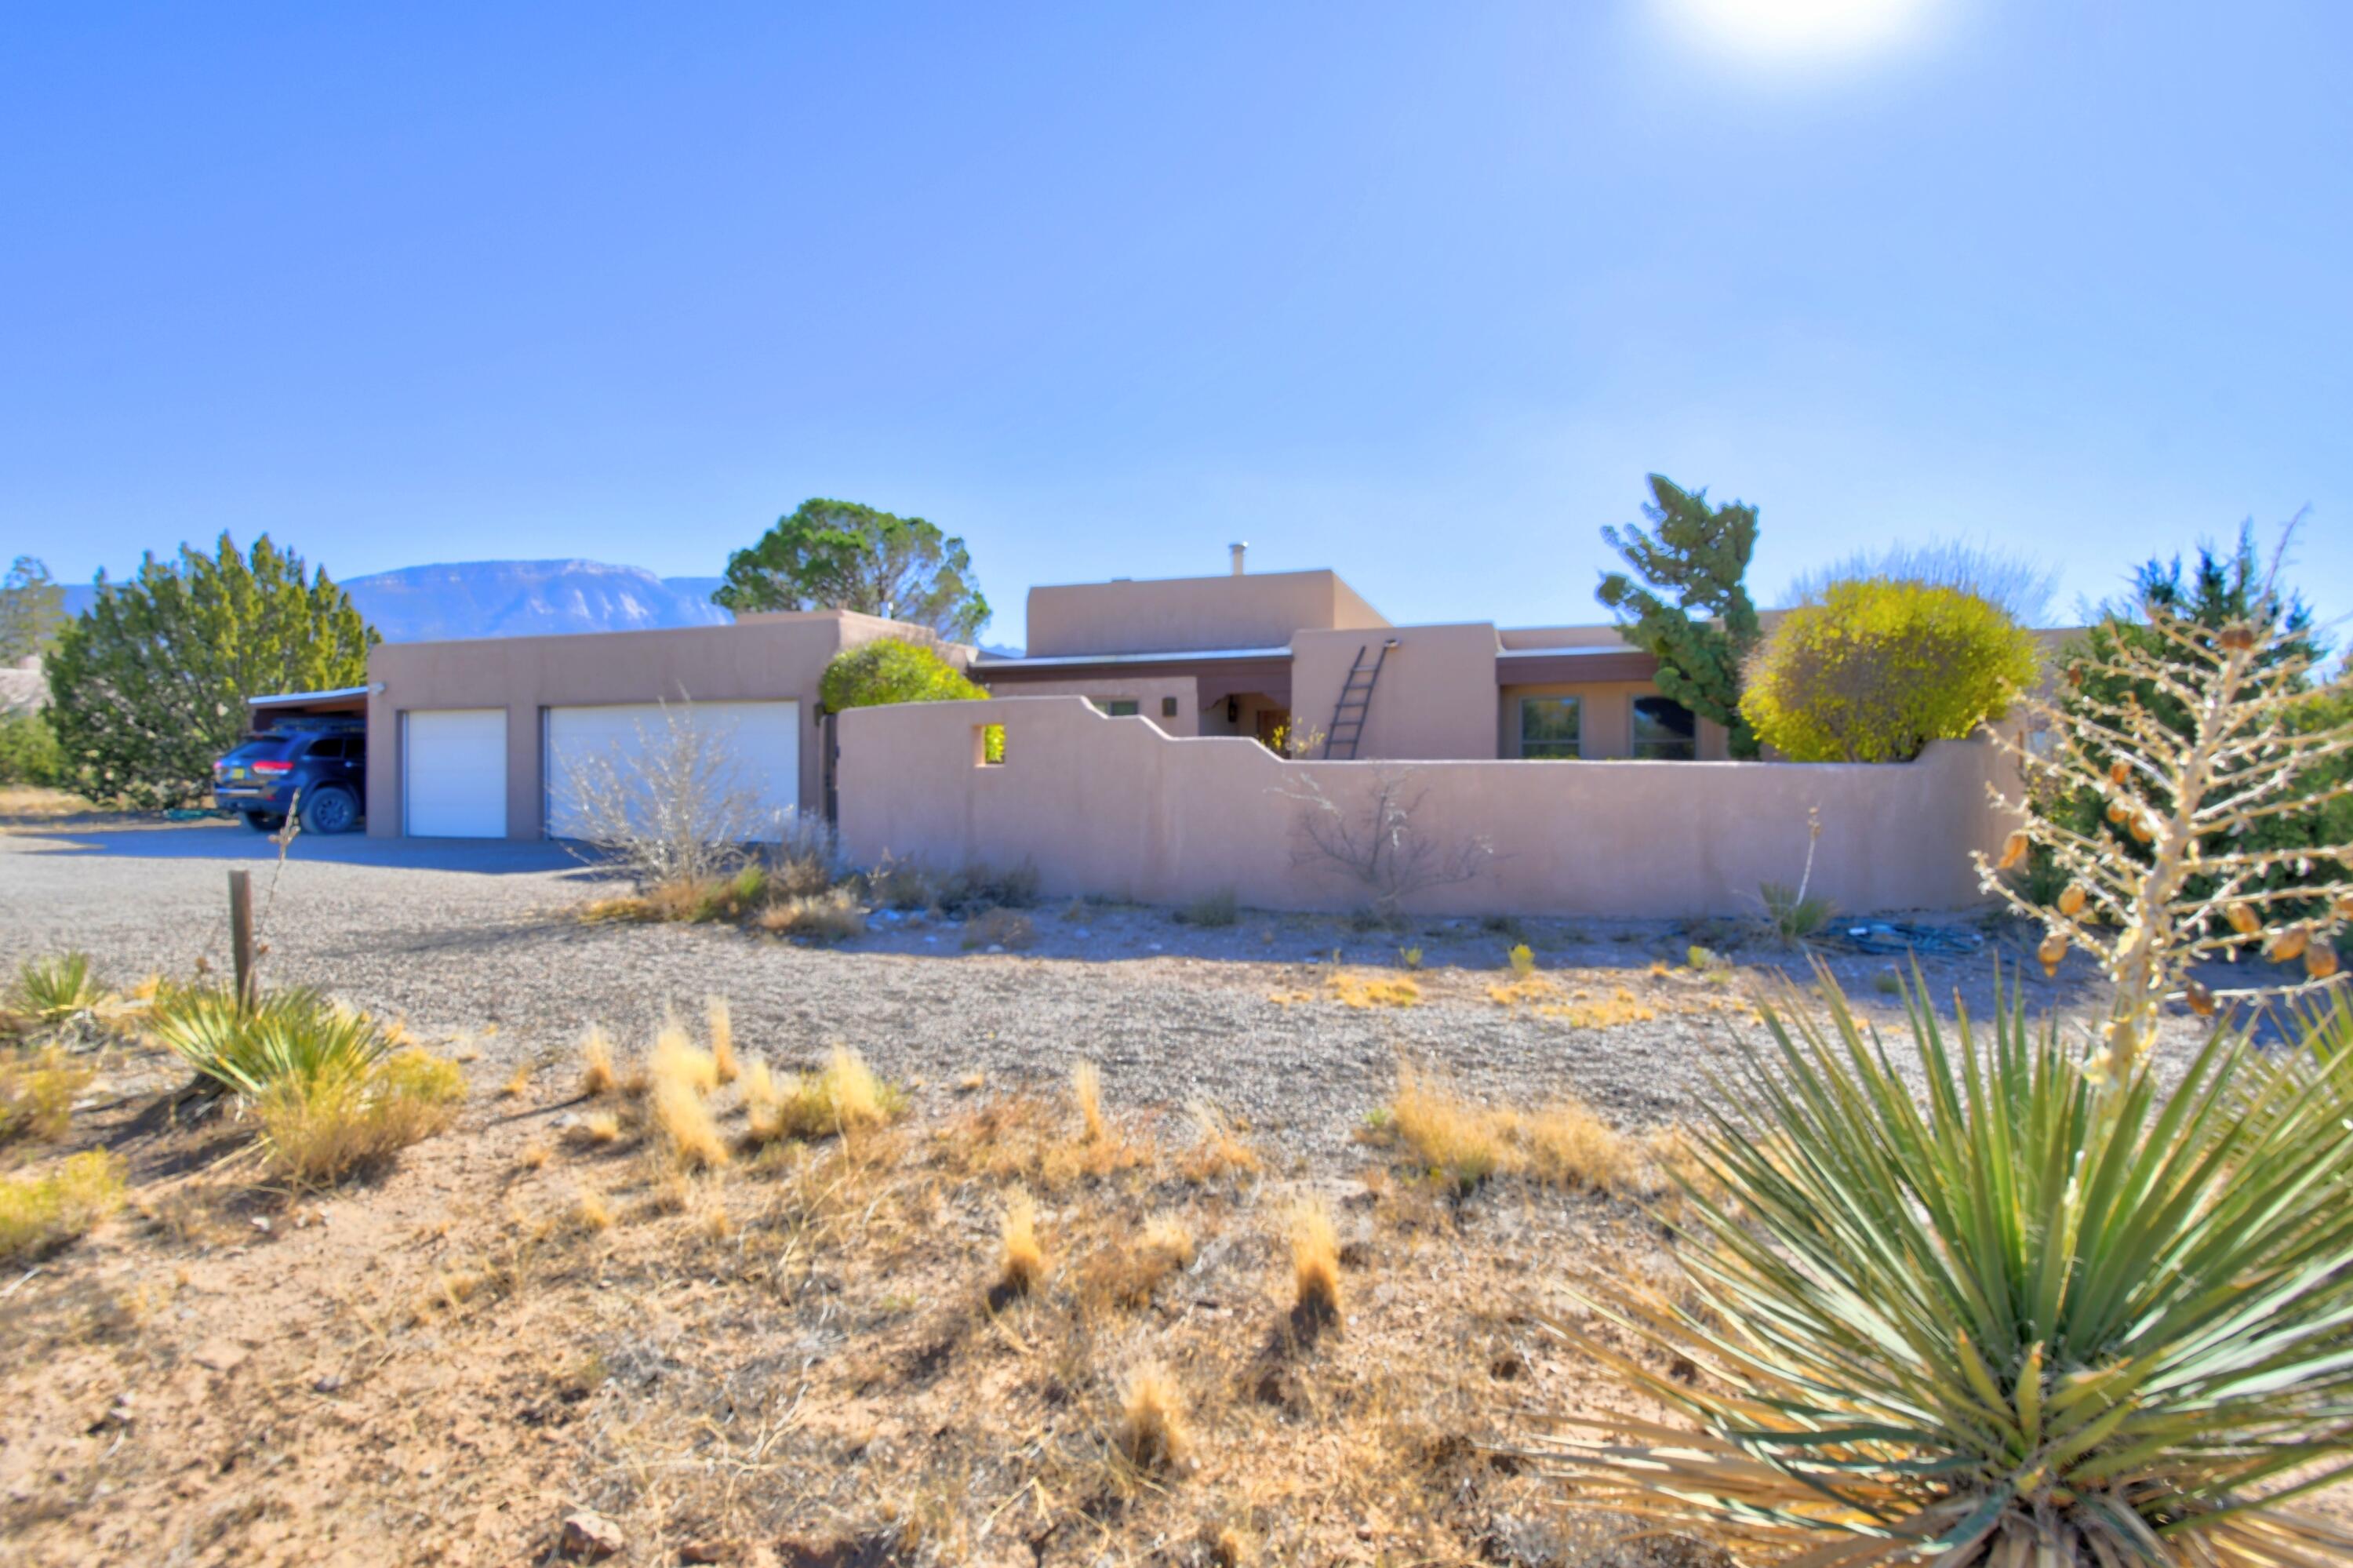 Welcome to this custom 1-level home (sunken living room does have 2 steps) on a 2.3 acre lot with amazing views of the Sandia Mountains, city lights & northern mesa views! Relax in the back yard and enjoy starry nights. Minutes to I-25 for easy access. T&G beamed ceilings, brick floors in kitchen, dining & living rooms. Kiva fireplace in living and a wood stove in the entry area. Refrigerated A/C in 2021. New well & pump 2019 - shared with available vacant lot next door. Studio/rec room is an addition with interior and exterior entrance - split unit for heating/cooling. Wood clad windows replaced 2019. Office could be a 4th bedroom. New septic 2021. 3 car garage + a carport. Silicone roof 2019 - has a transferable warranty until 2029.